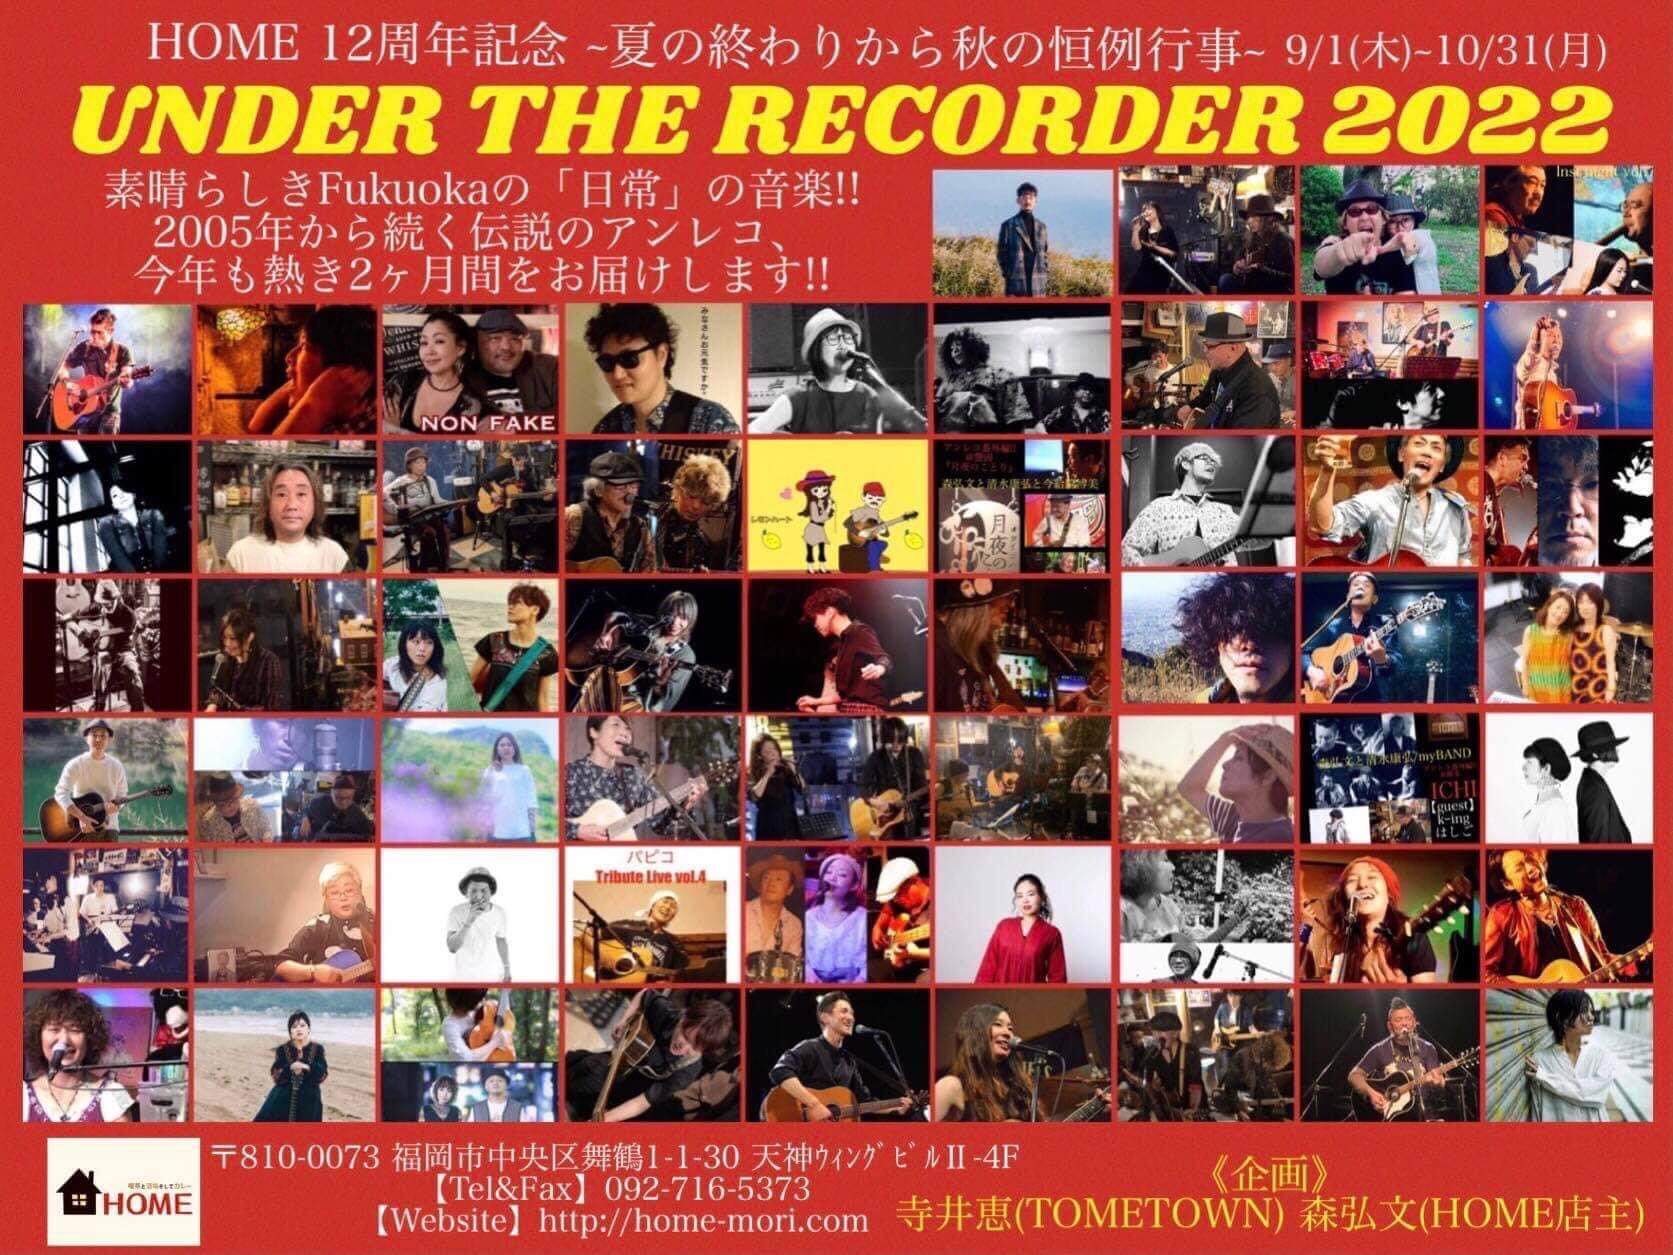 『UNDER THE RECORDER 2022 』